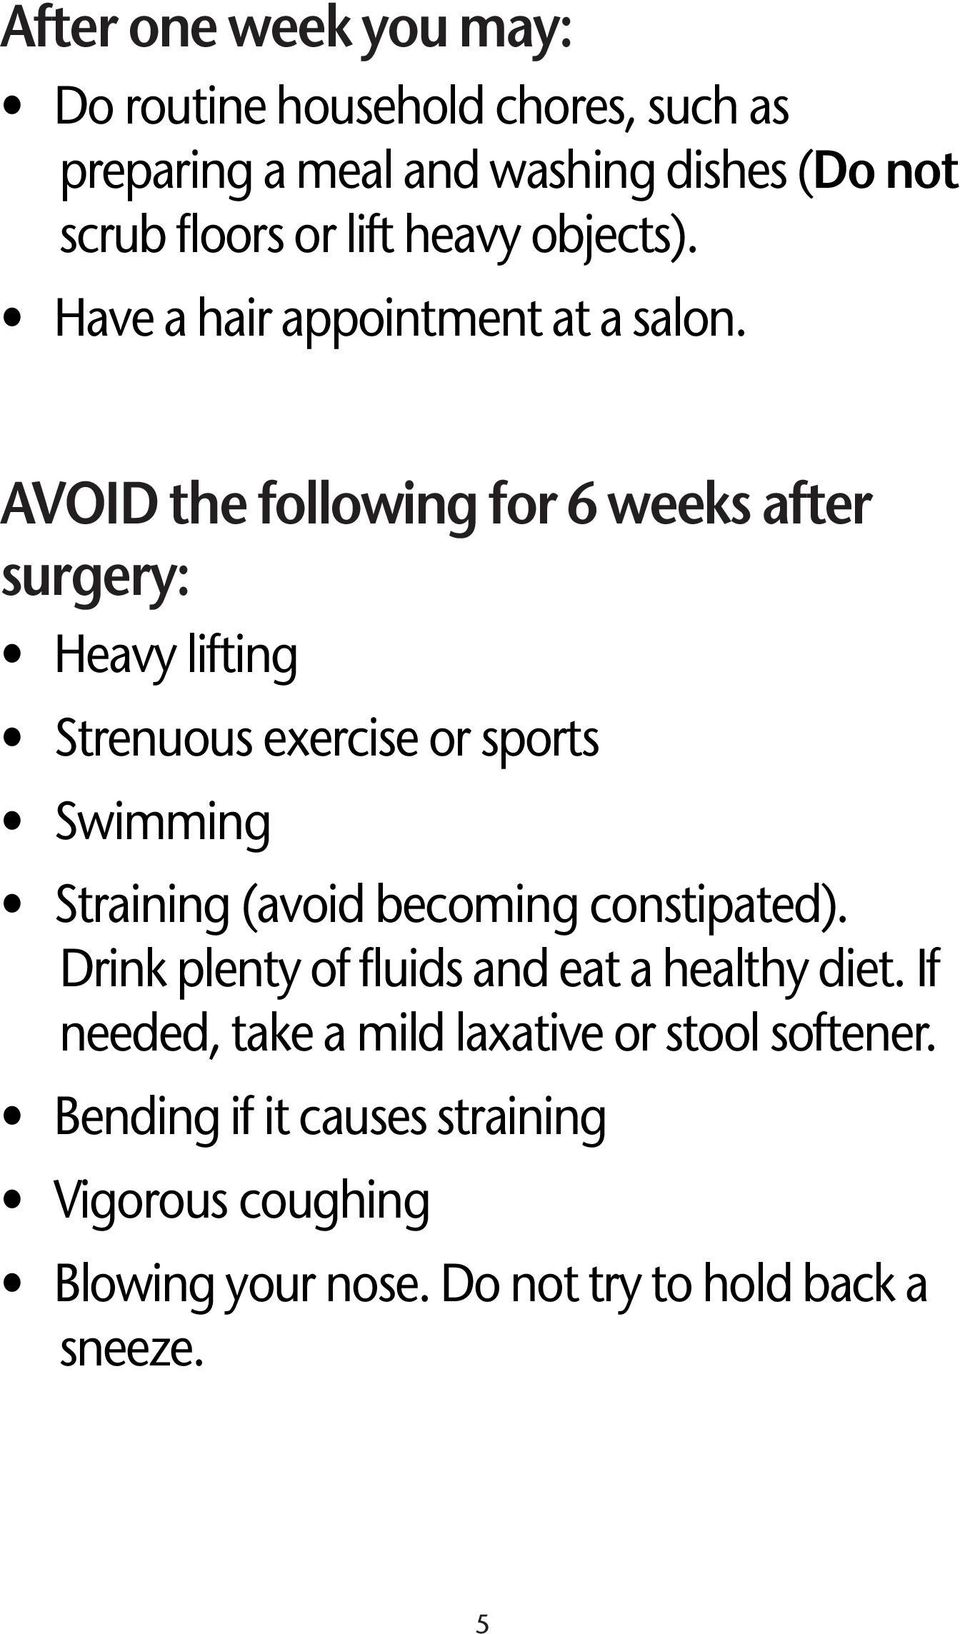 AVOID the following for 6 weeks after surgery: Heavy lifting Strenuous exercise or sports Swimming Straining (avoid becoming